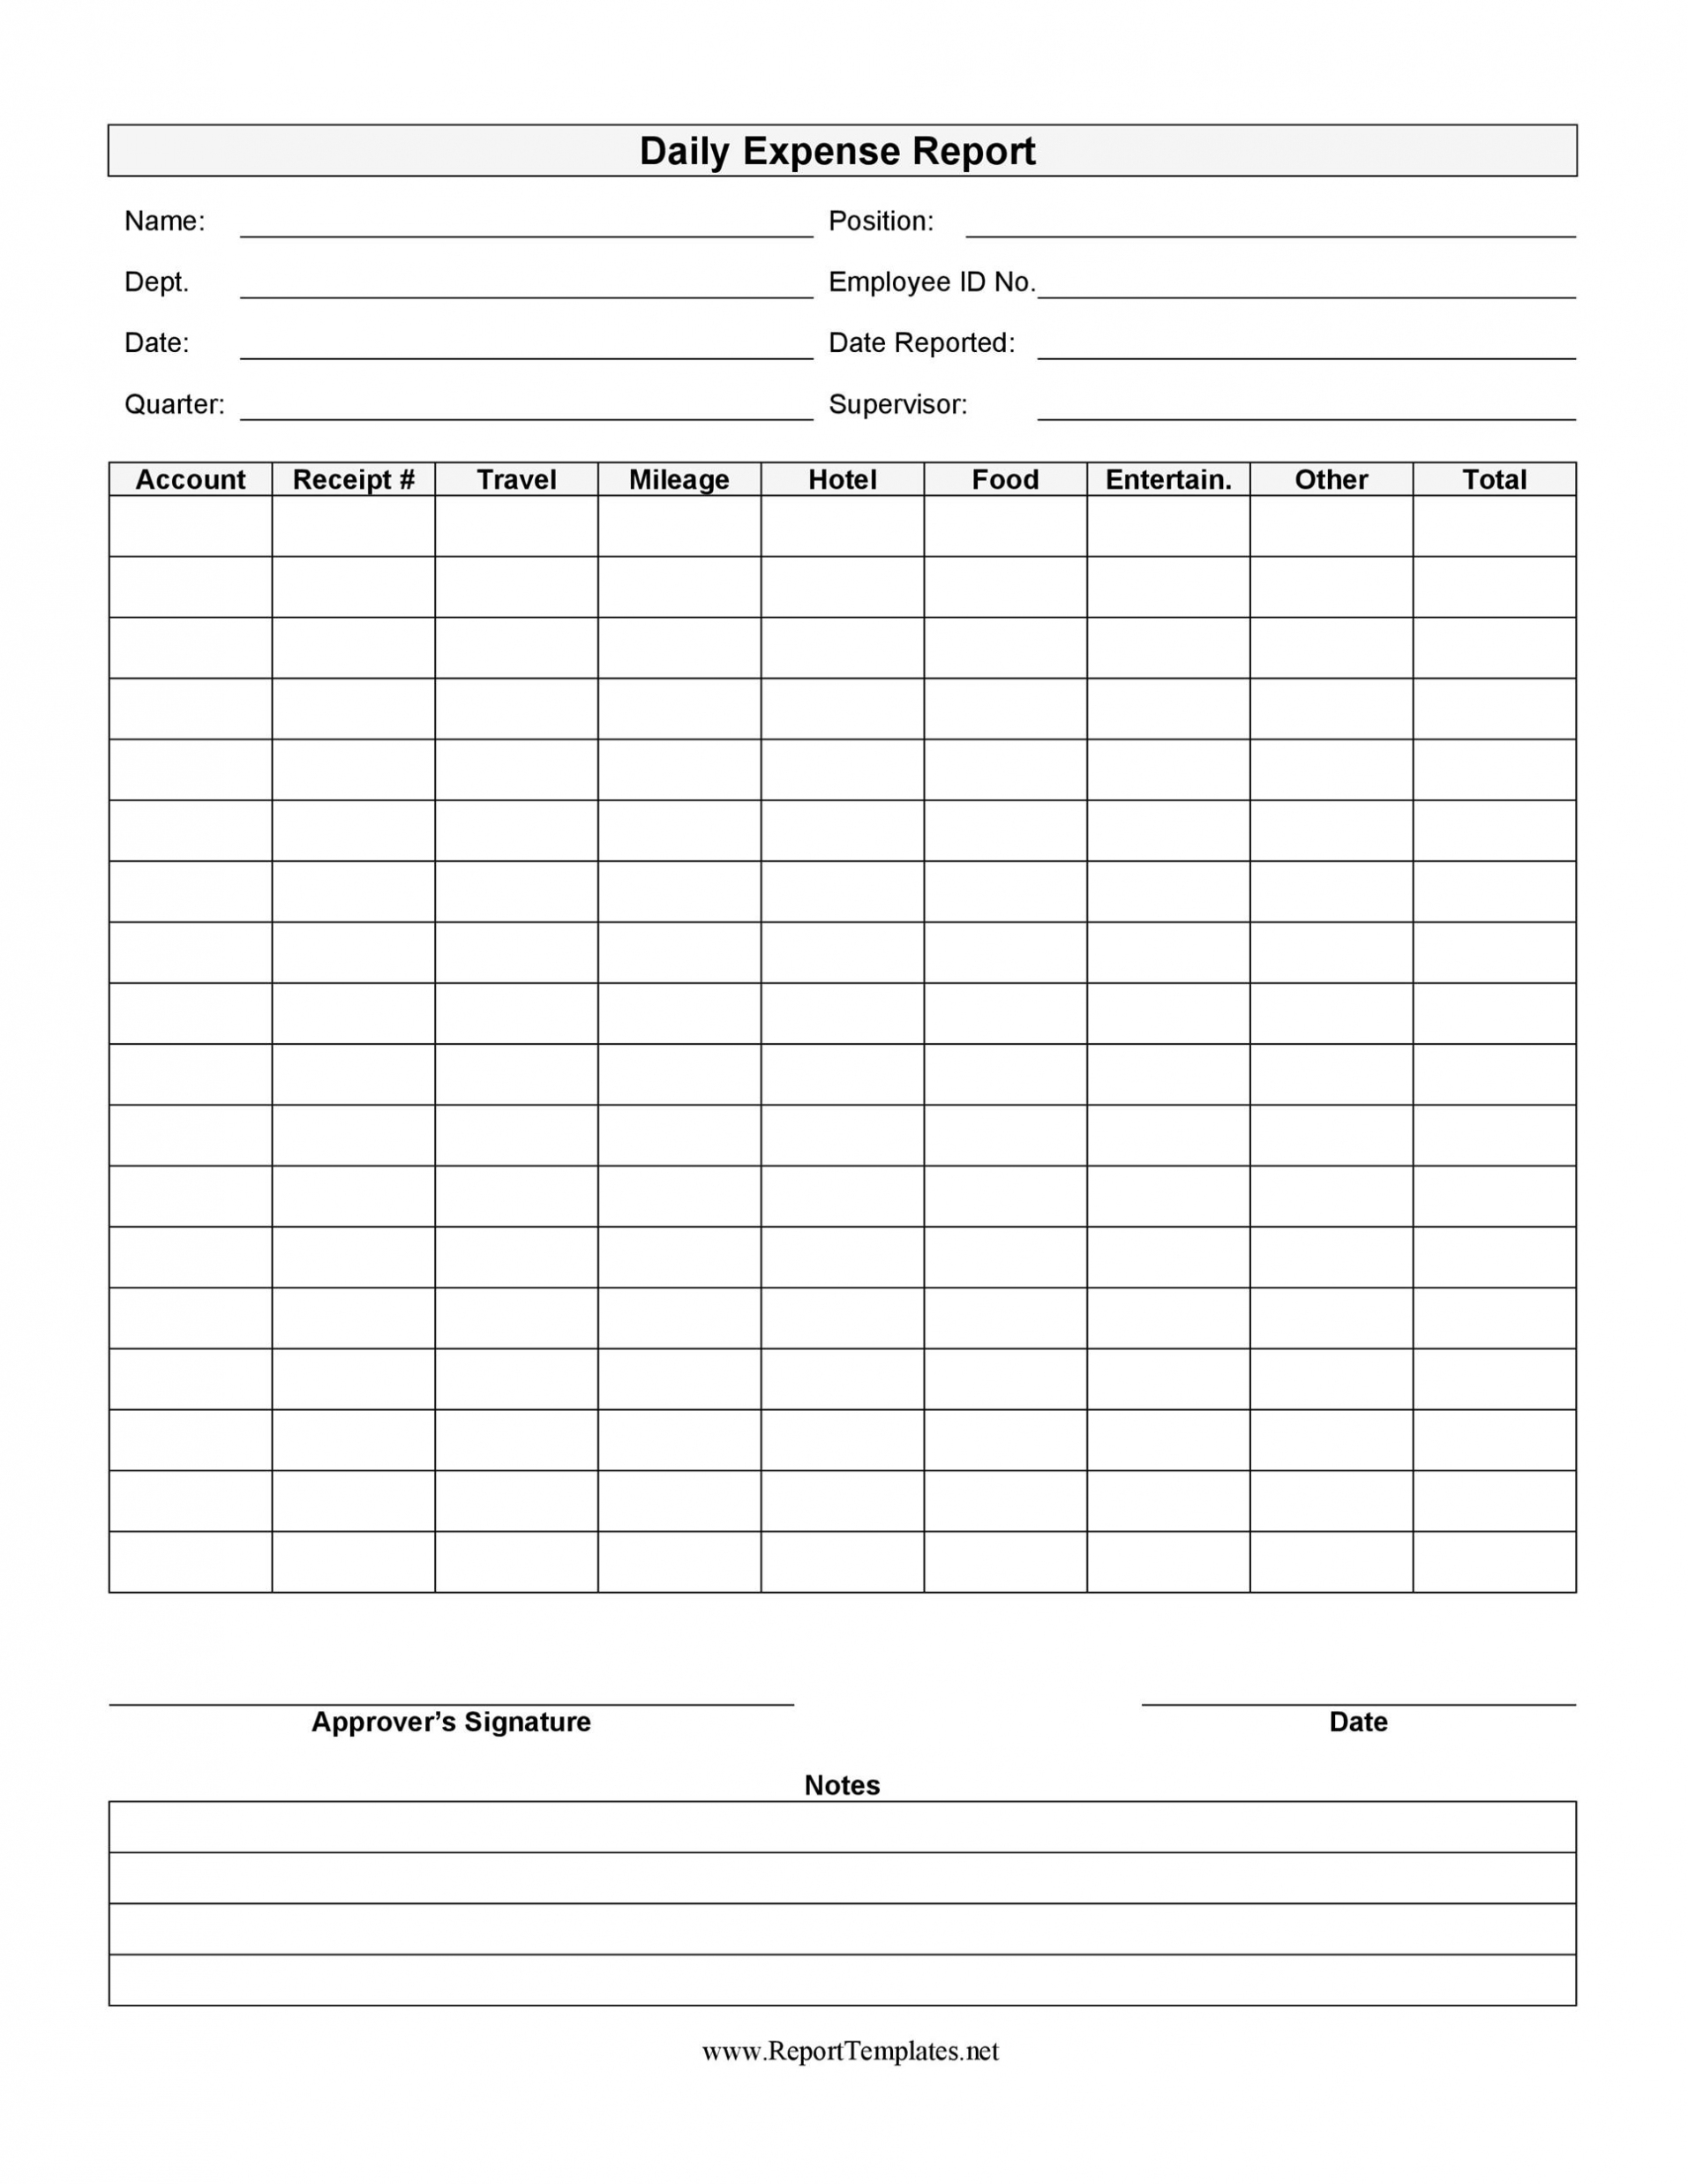 free-income-expense-report-template-mazvg